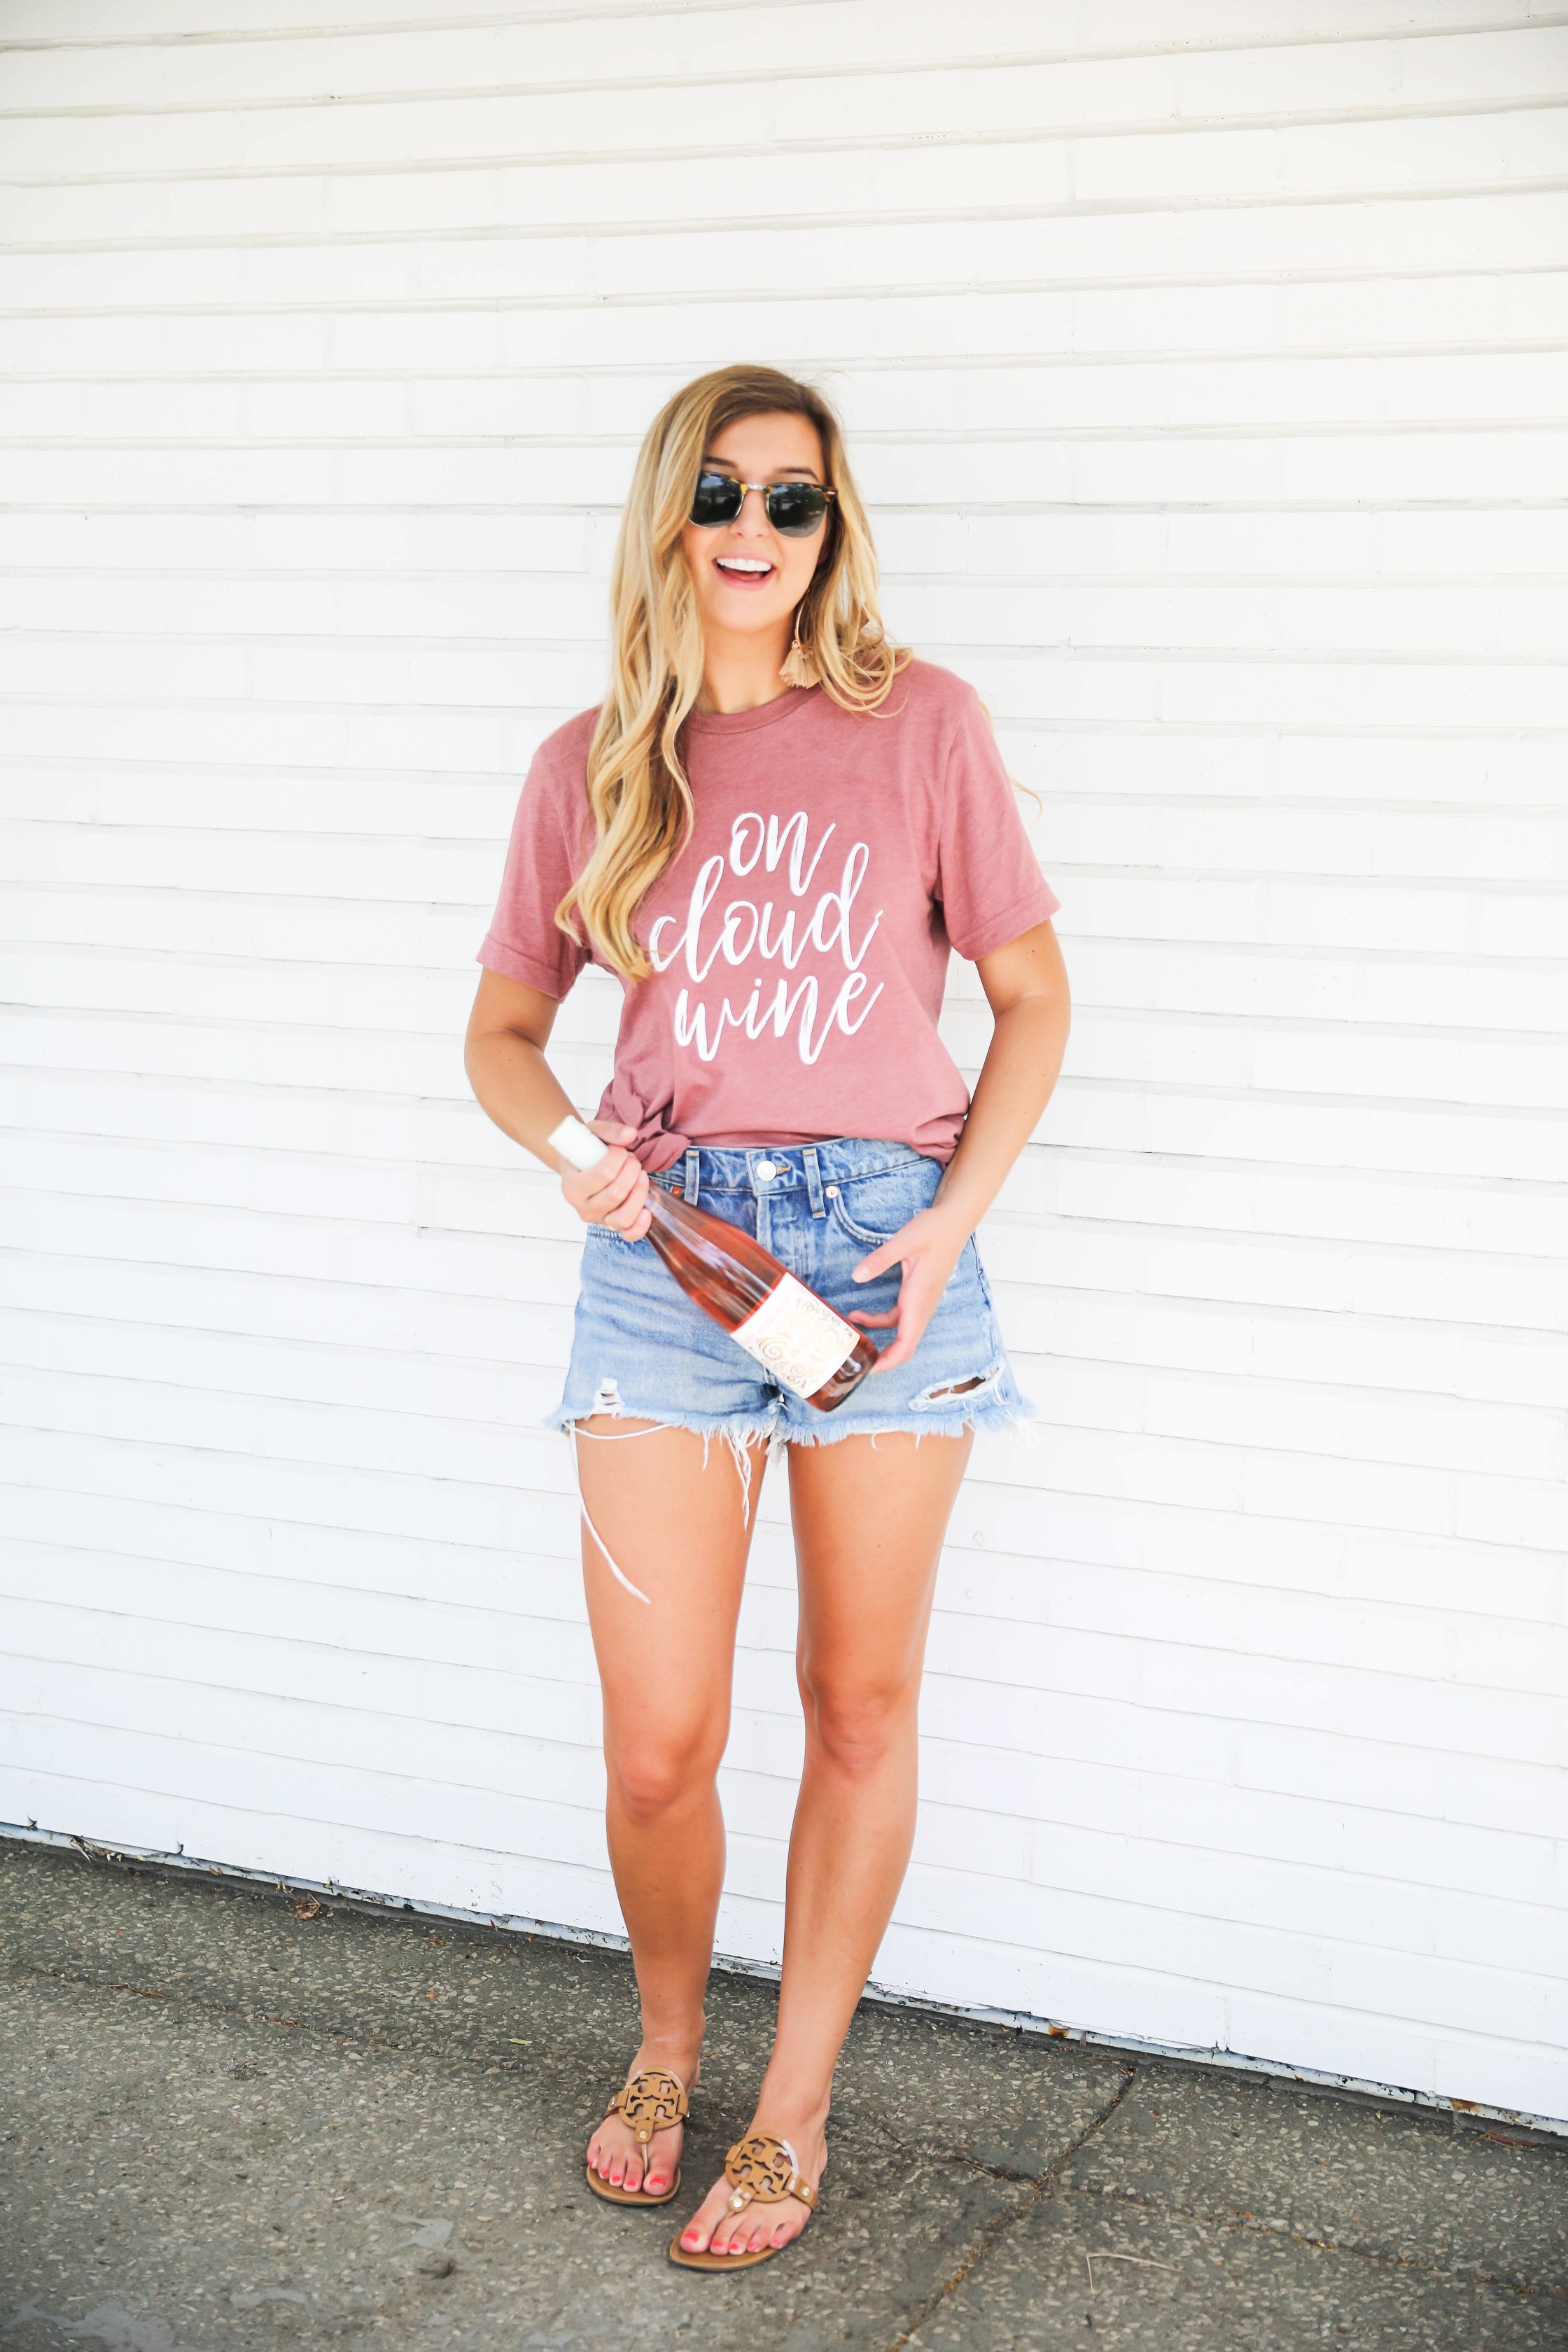 National Rosé Day 2018! I love this on cloud wine tshirt! Wine tees are my favorite! I paired it with the best ripped denim shorts in the world! Get the details on fashion blog daily dose of charm by lauren lindmark